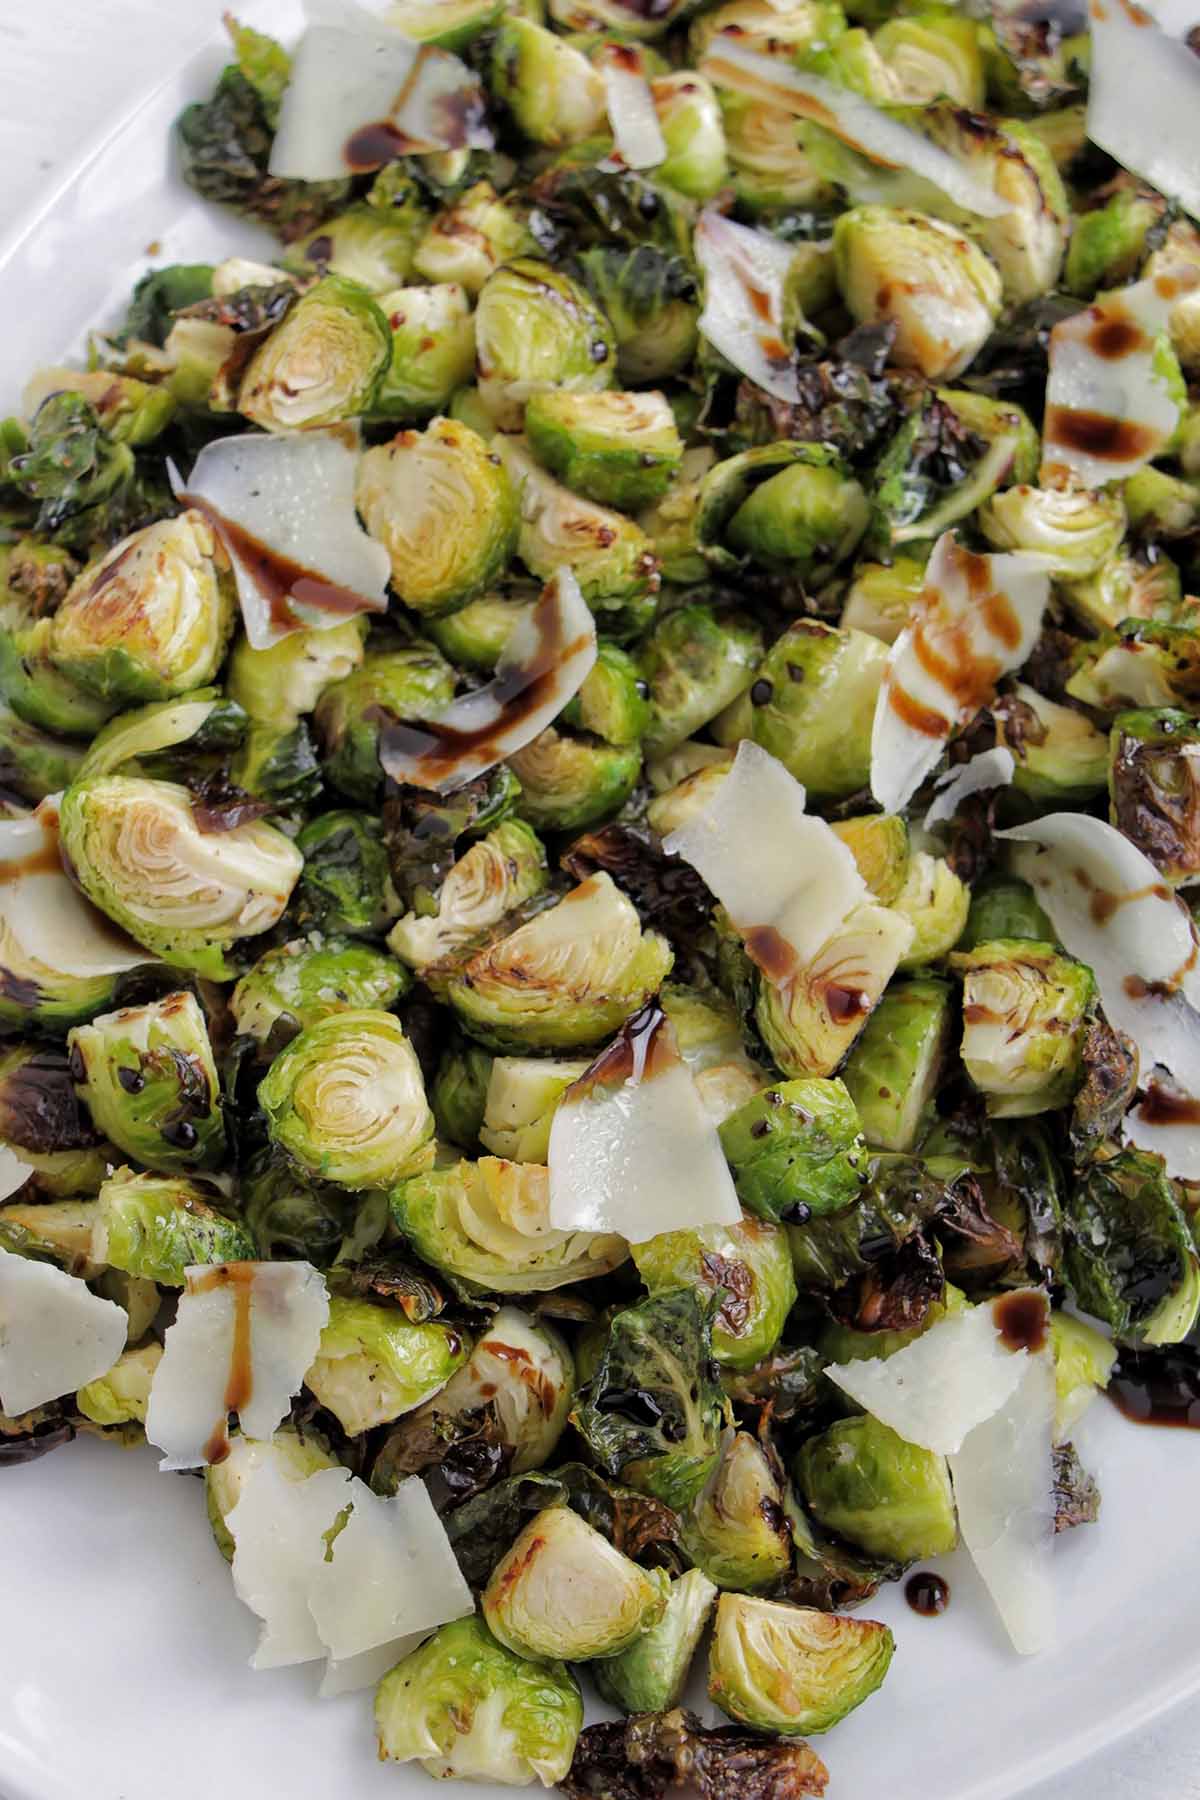 roasted brussel sprouts topped with balsamic glaze and parmesan cheese.